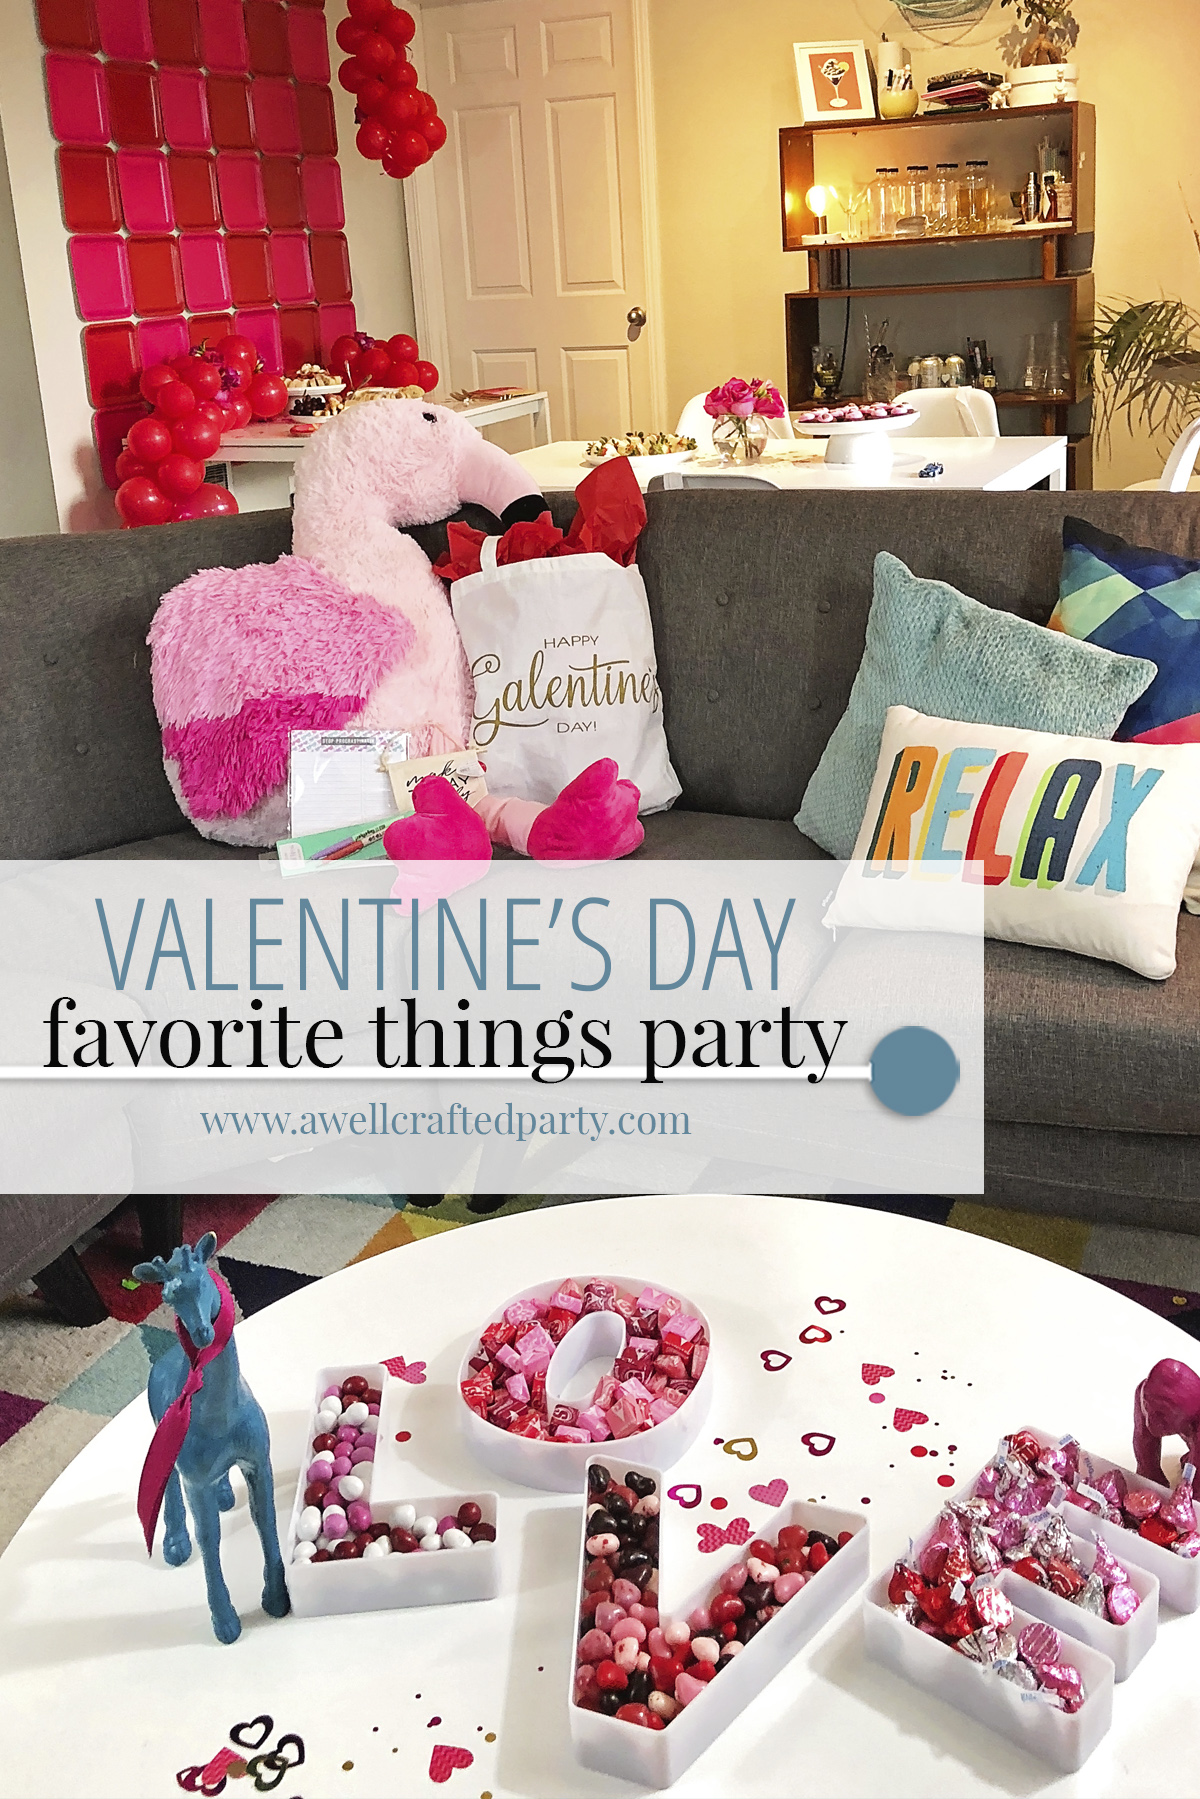 Valentine's Day favorite things party for a Galentine's Day party!